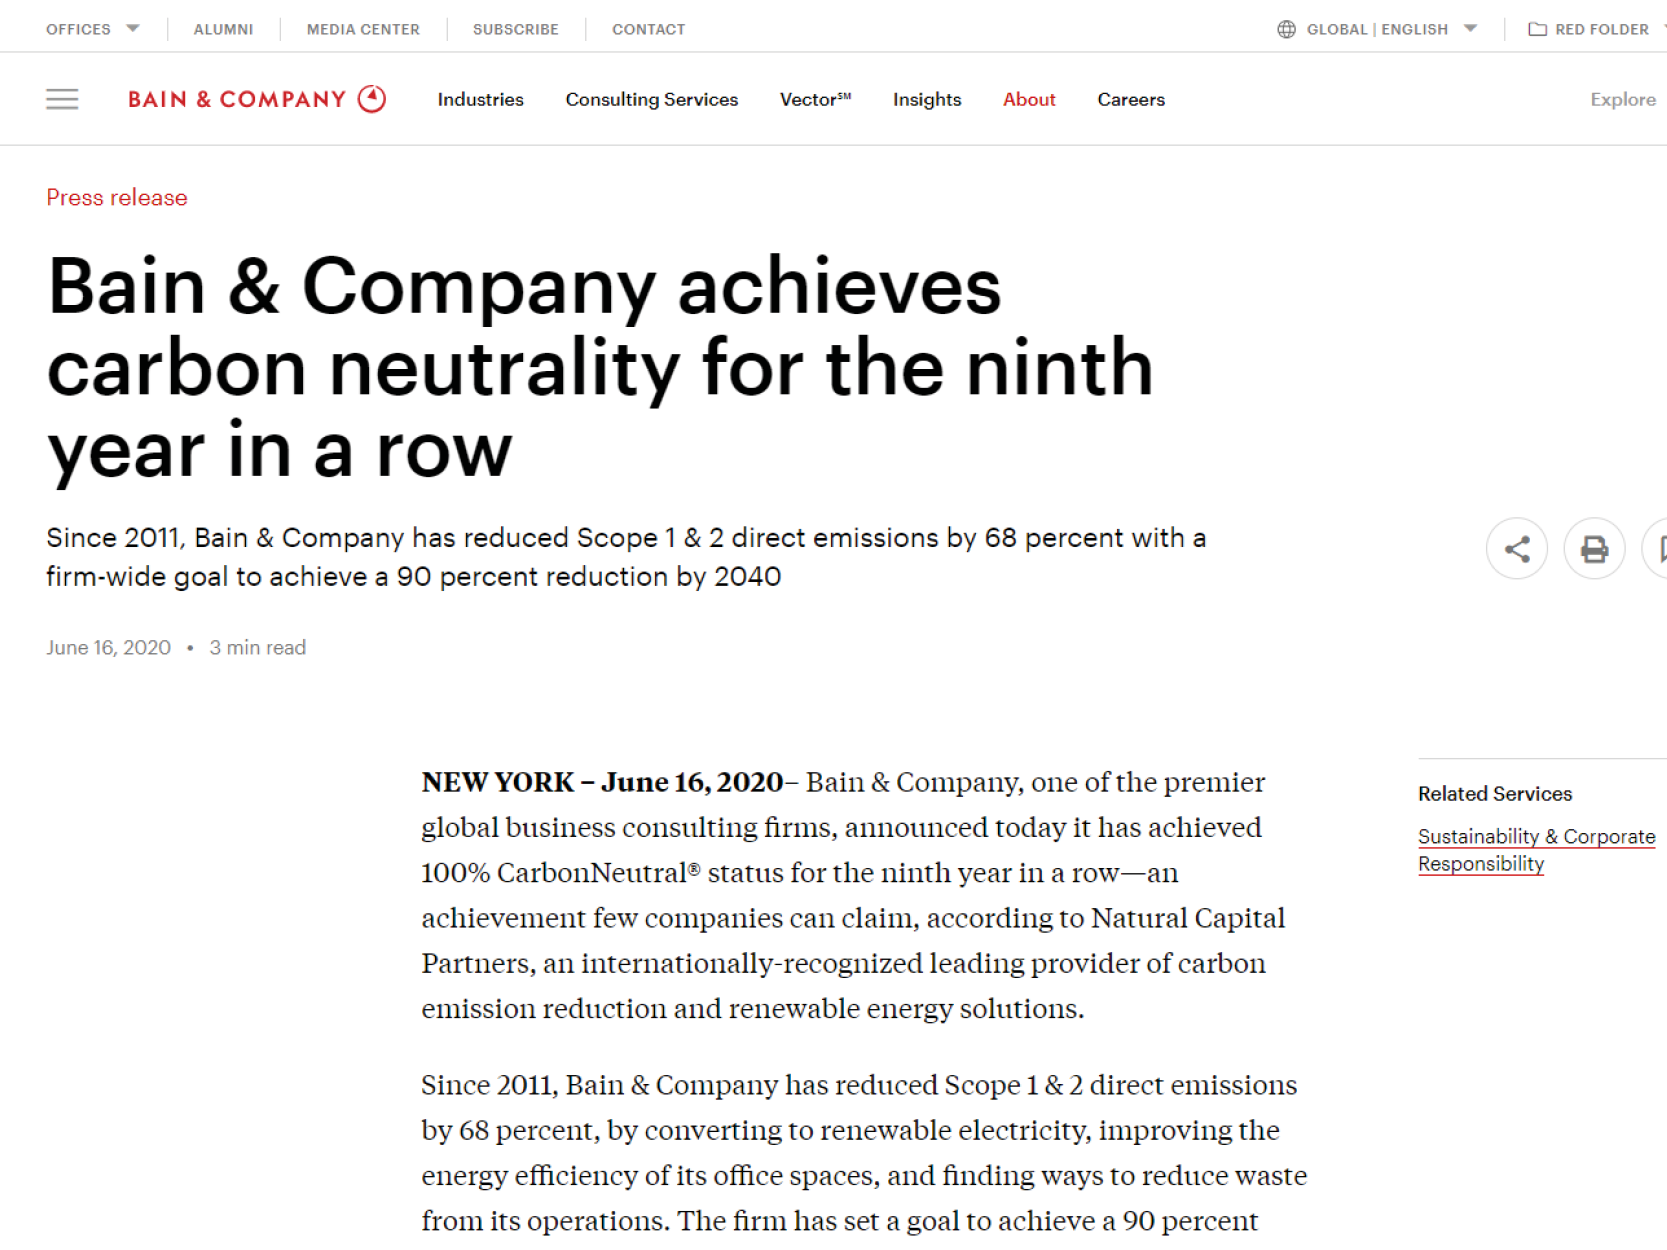 Bain & Company achieves carbon neutrality for the ninth year in a row